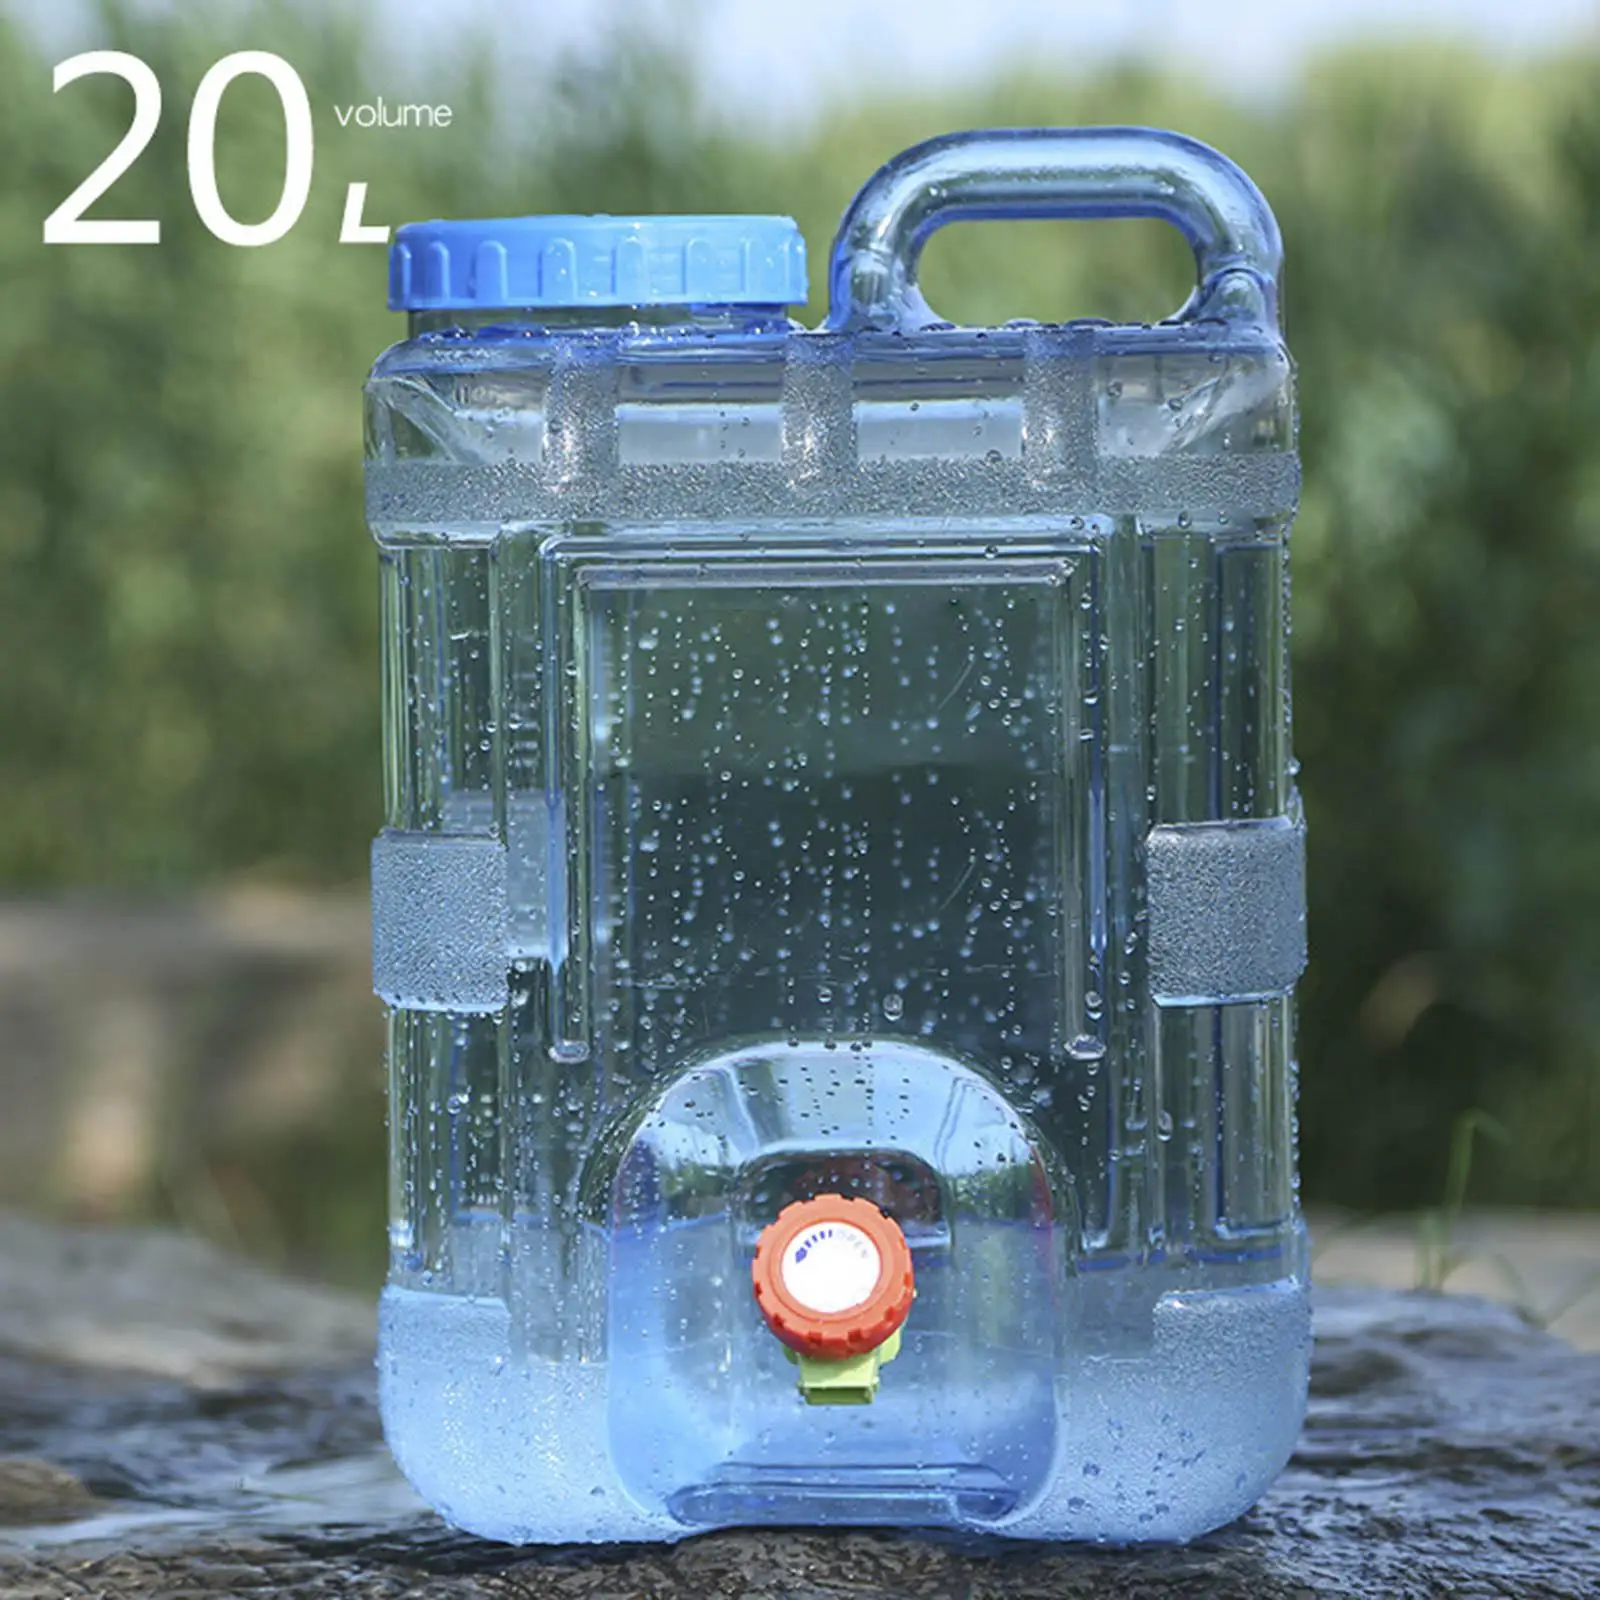 20L Capacity Water Container with Faucet Drink Dispenser for Hiking Car